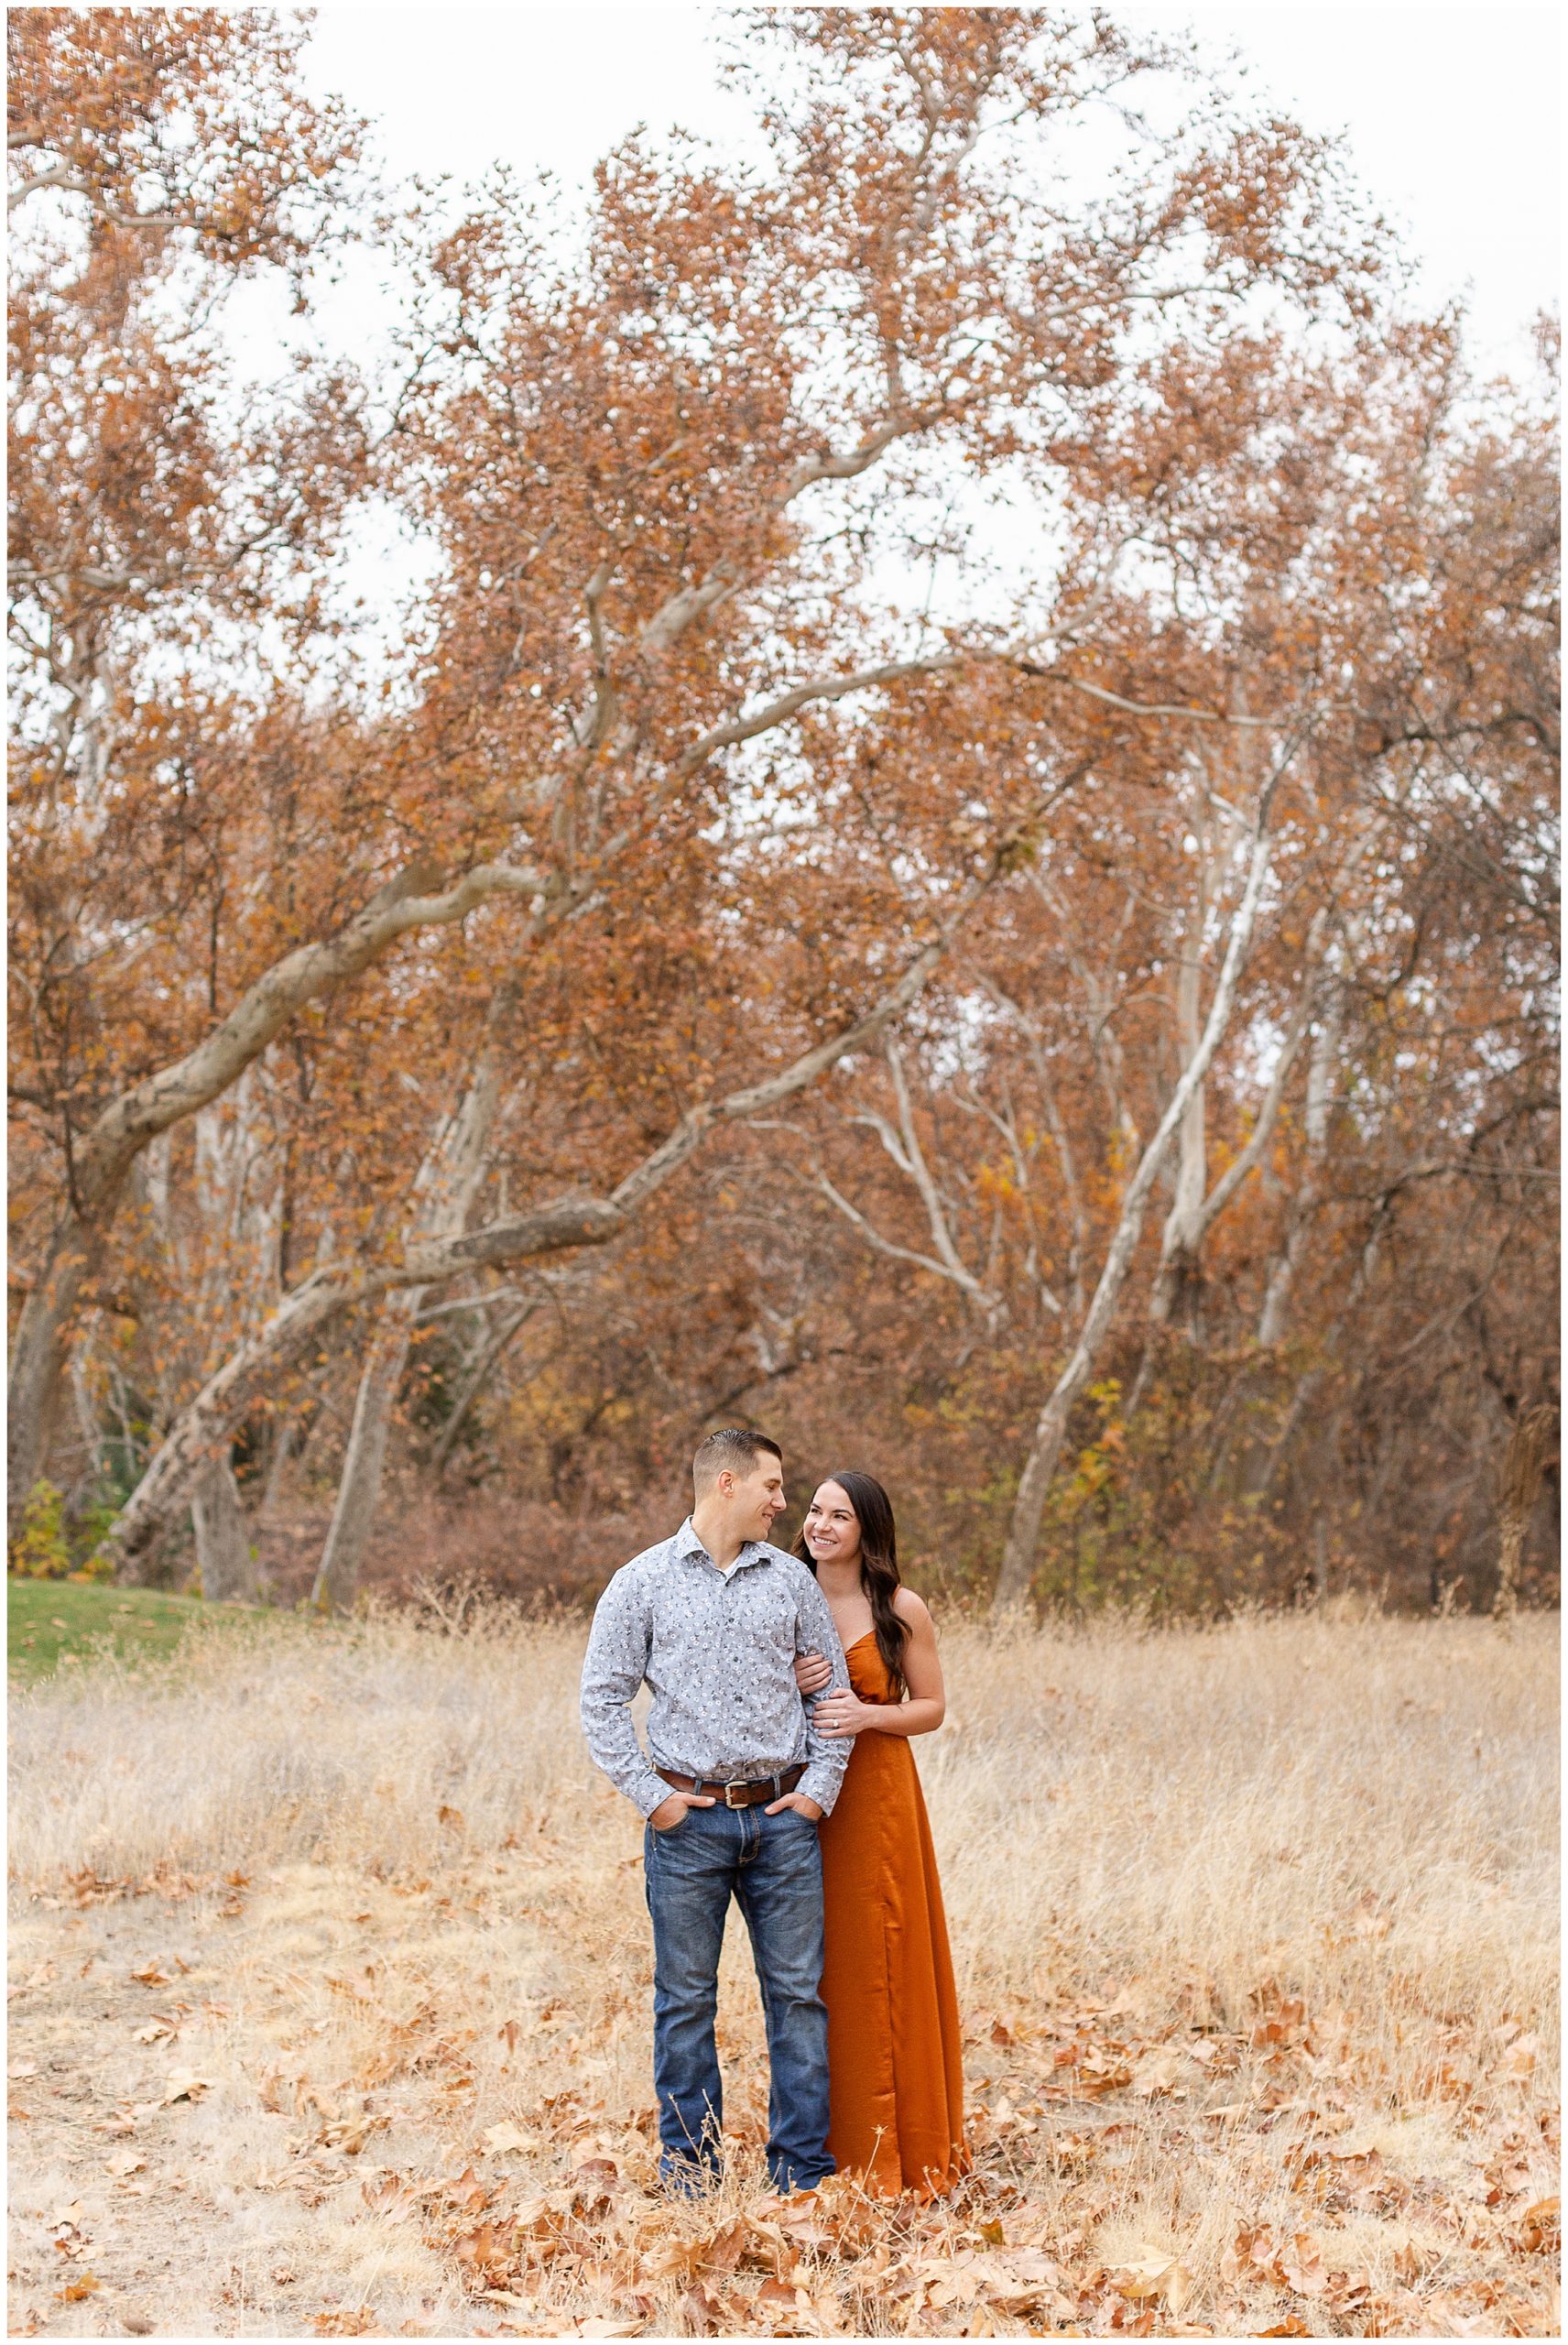 Winter Engagement Session with Fall Colors | Lauren + Sean